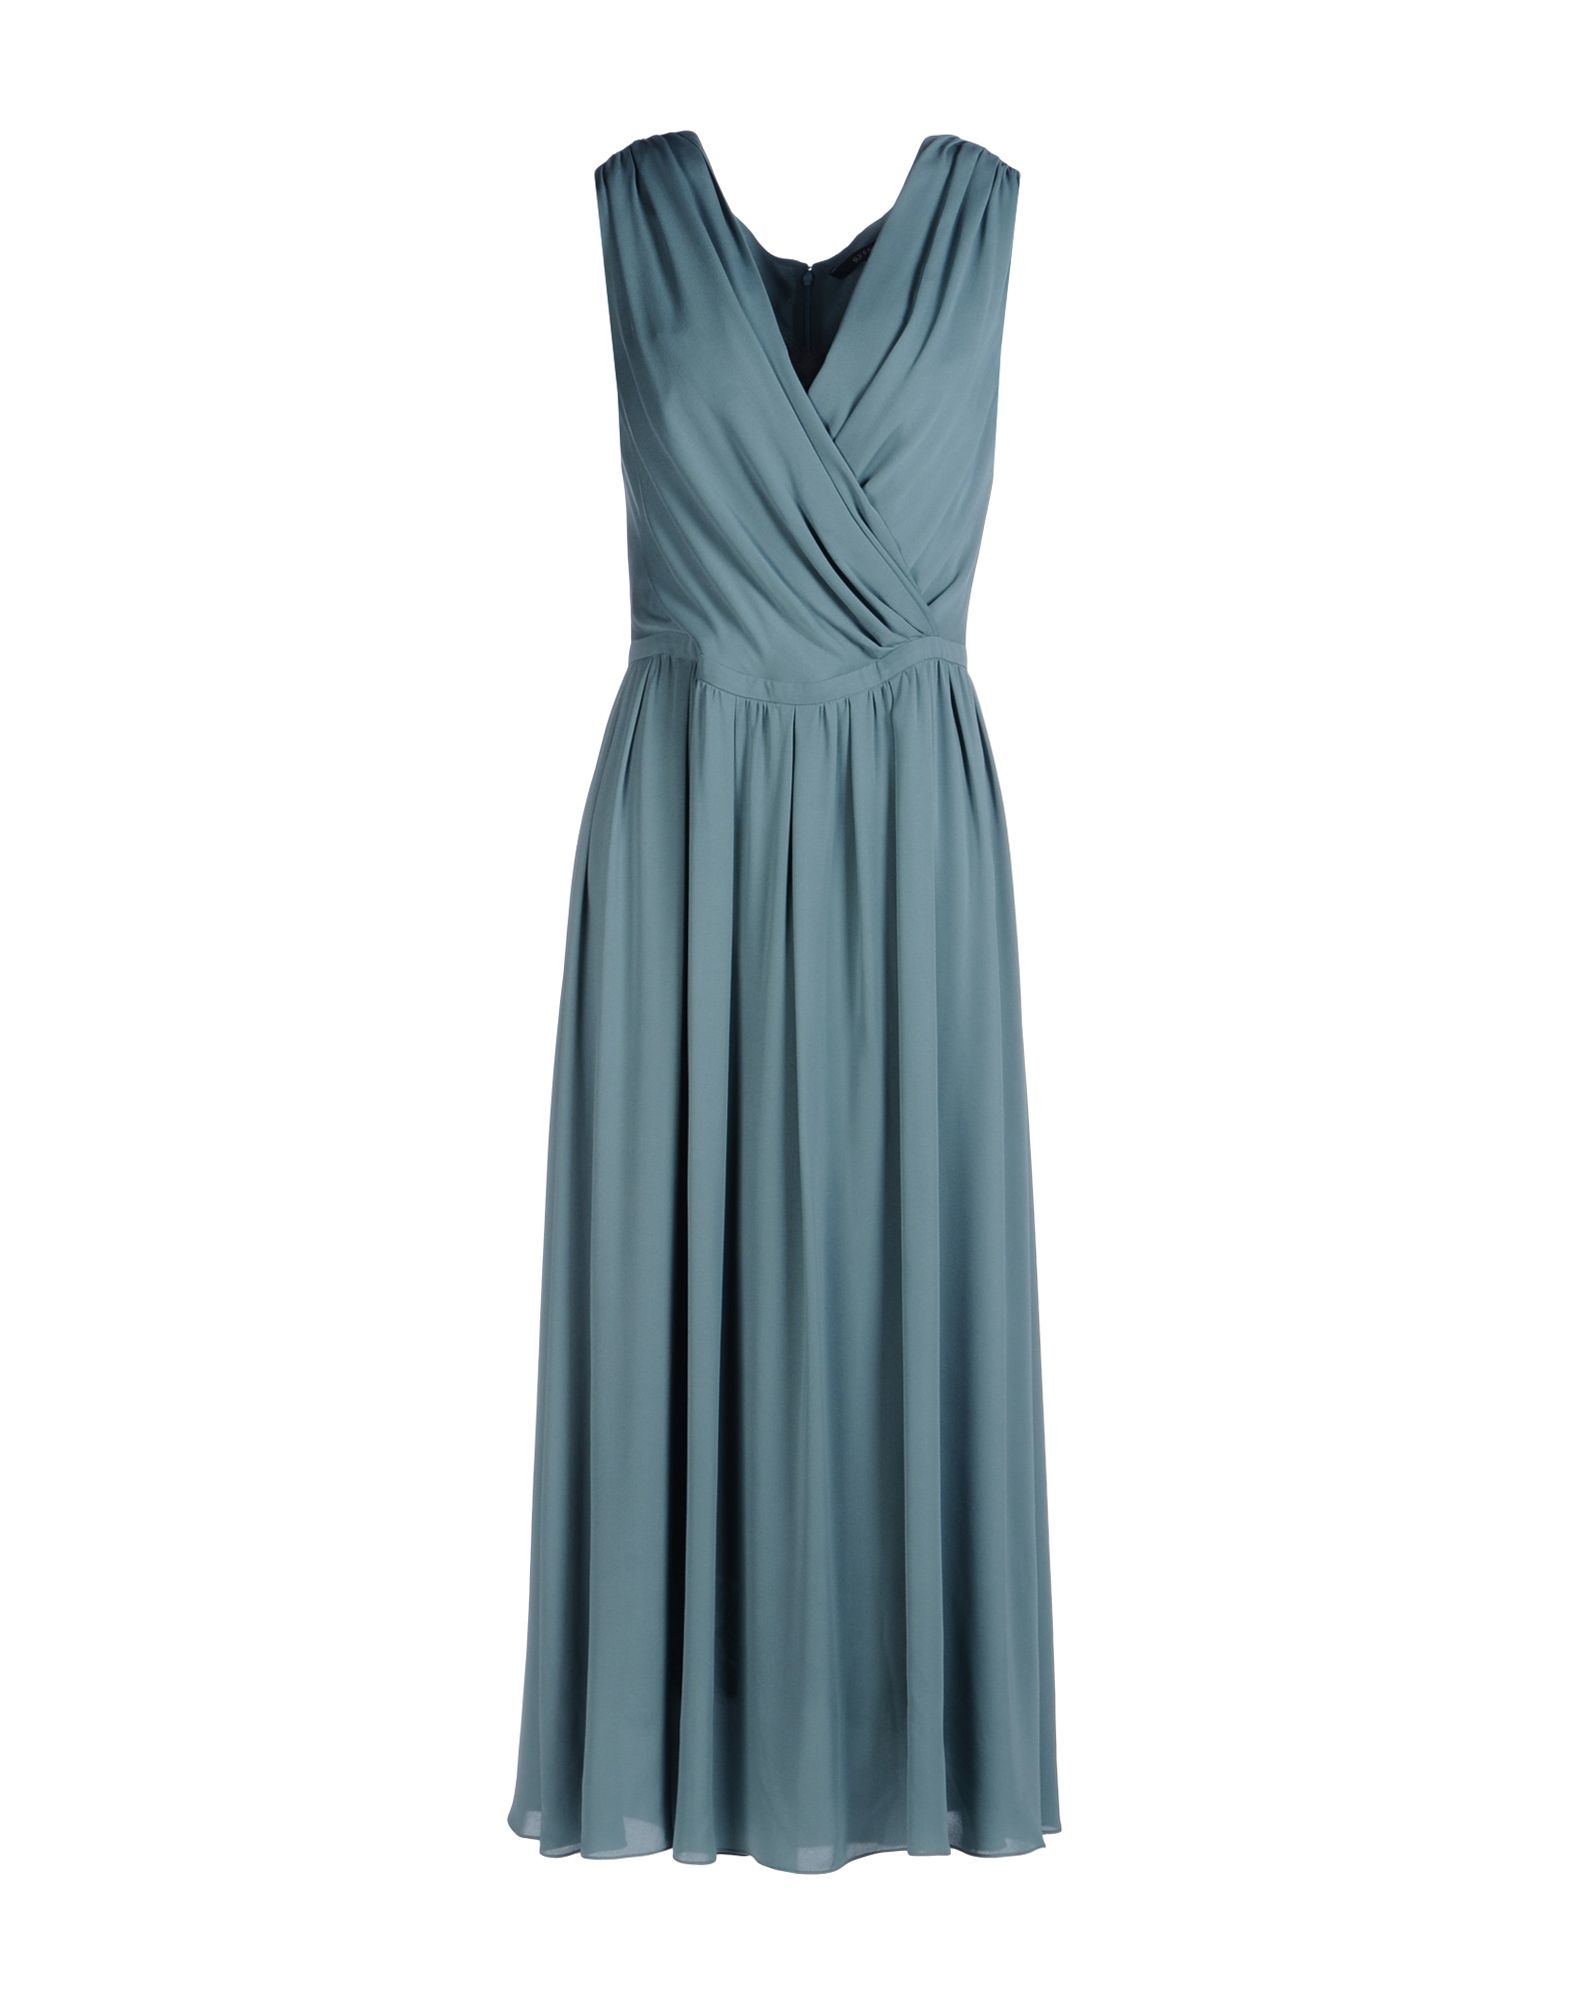 Lyst - Gucci 3/4 Length Dress in Green